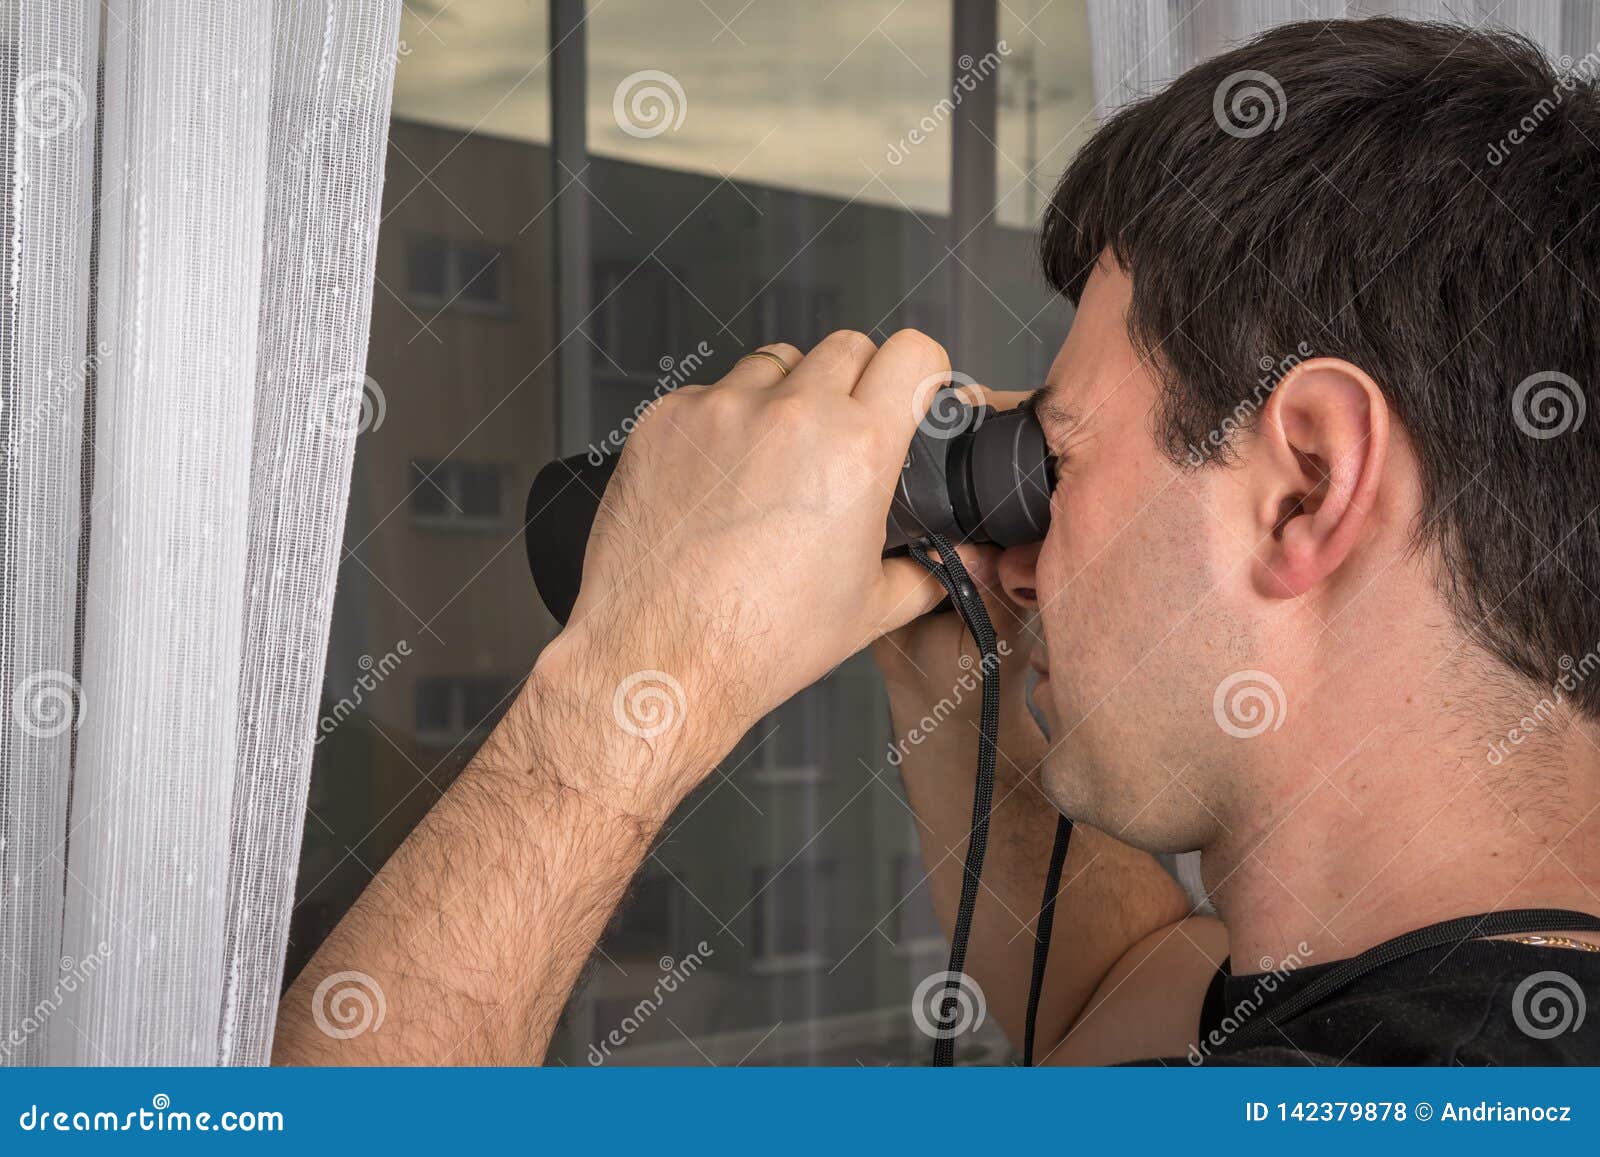 man is spying his neighbours with binoculars